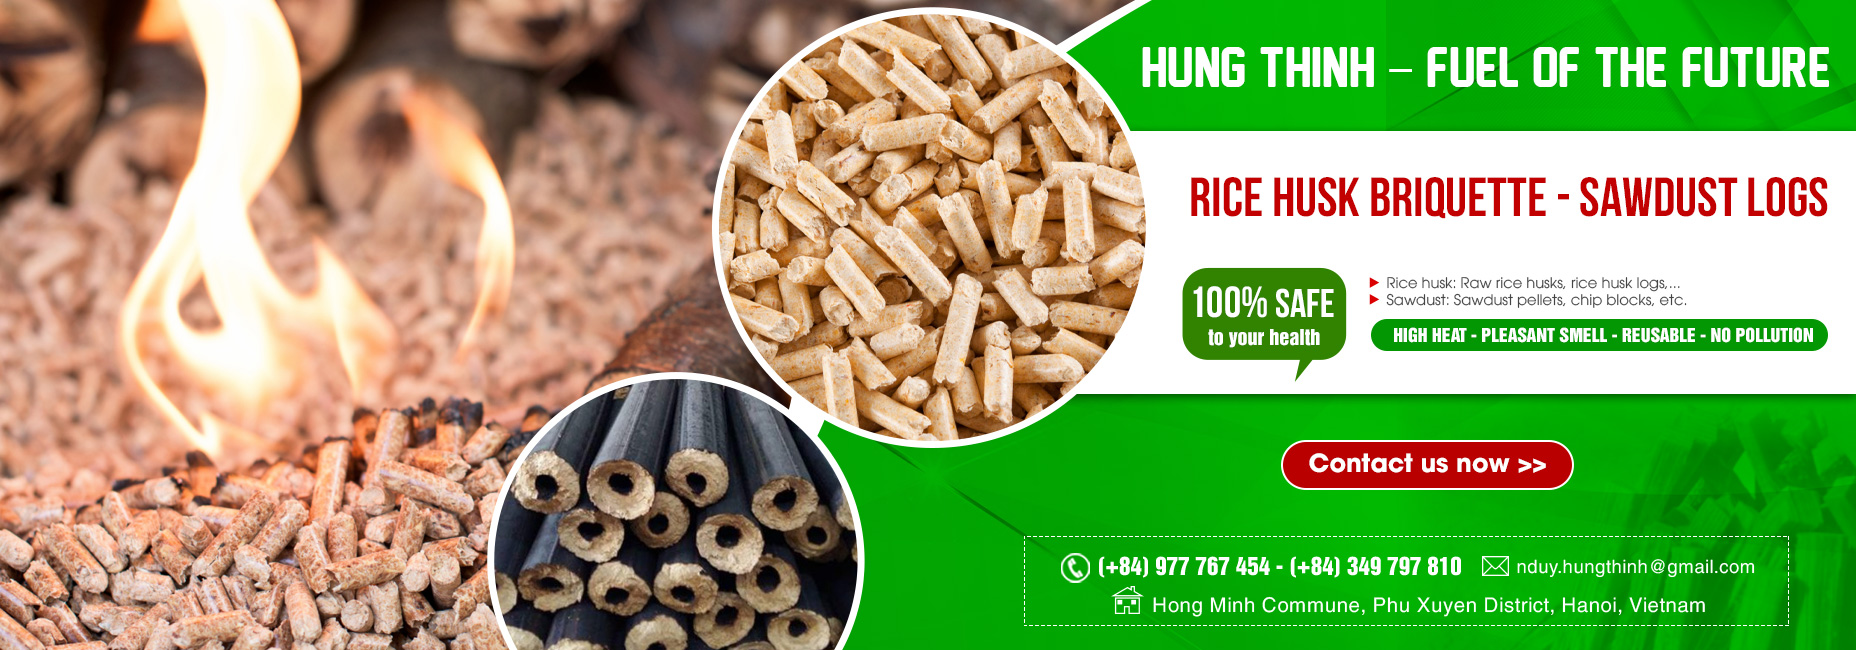 HUNG THINH IMPORT EXPORT CO., LTD